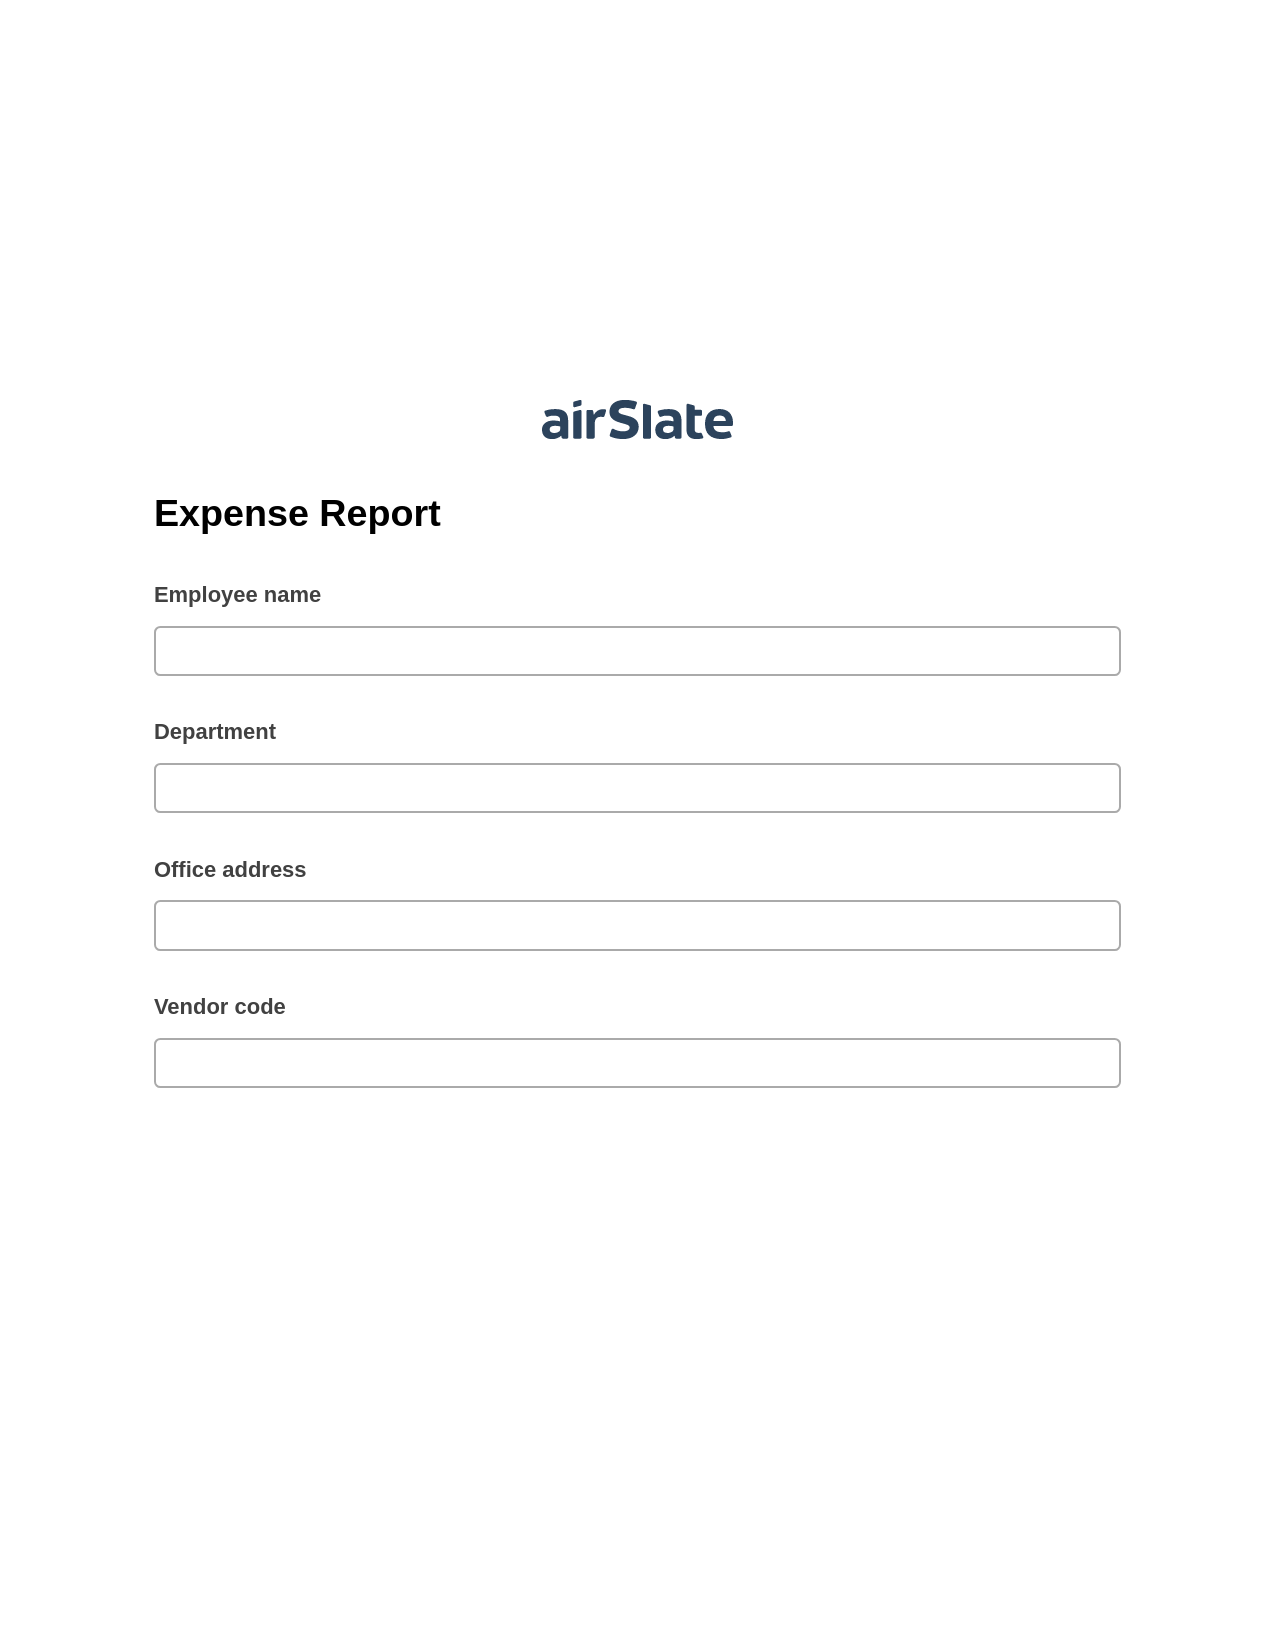 Multirole Expense Report Pre-fill Slate from MS Dynamics 365 Records Bot, Pre-fill with Custom Data Bot, Export to Excel 365 Bot